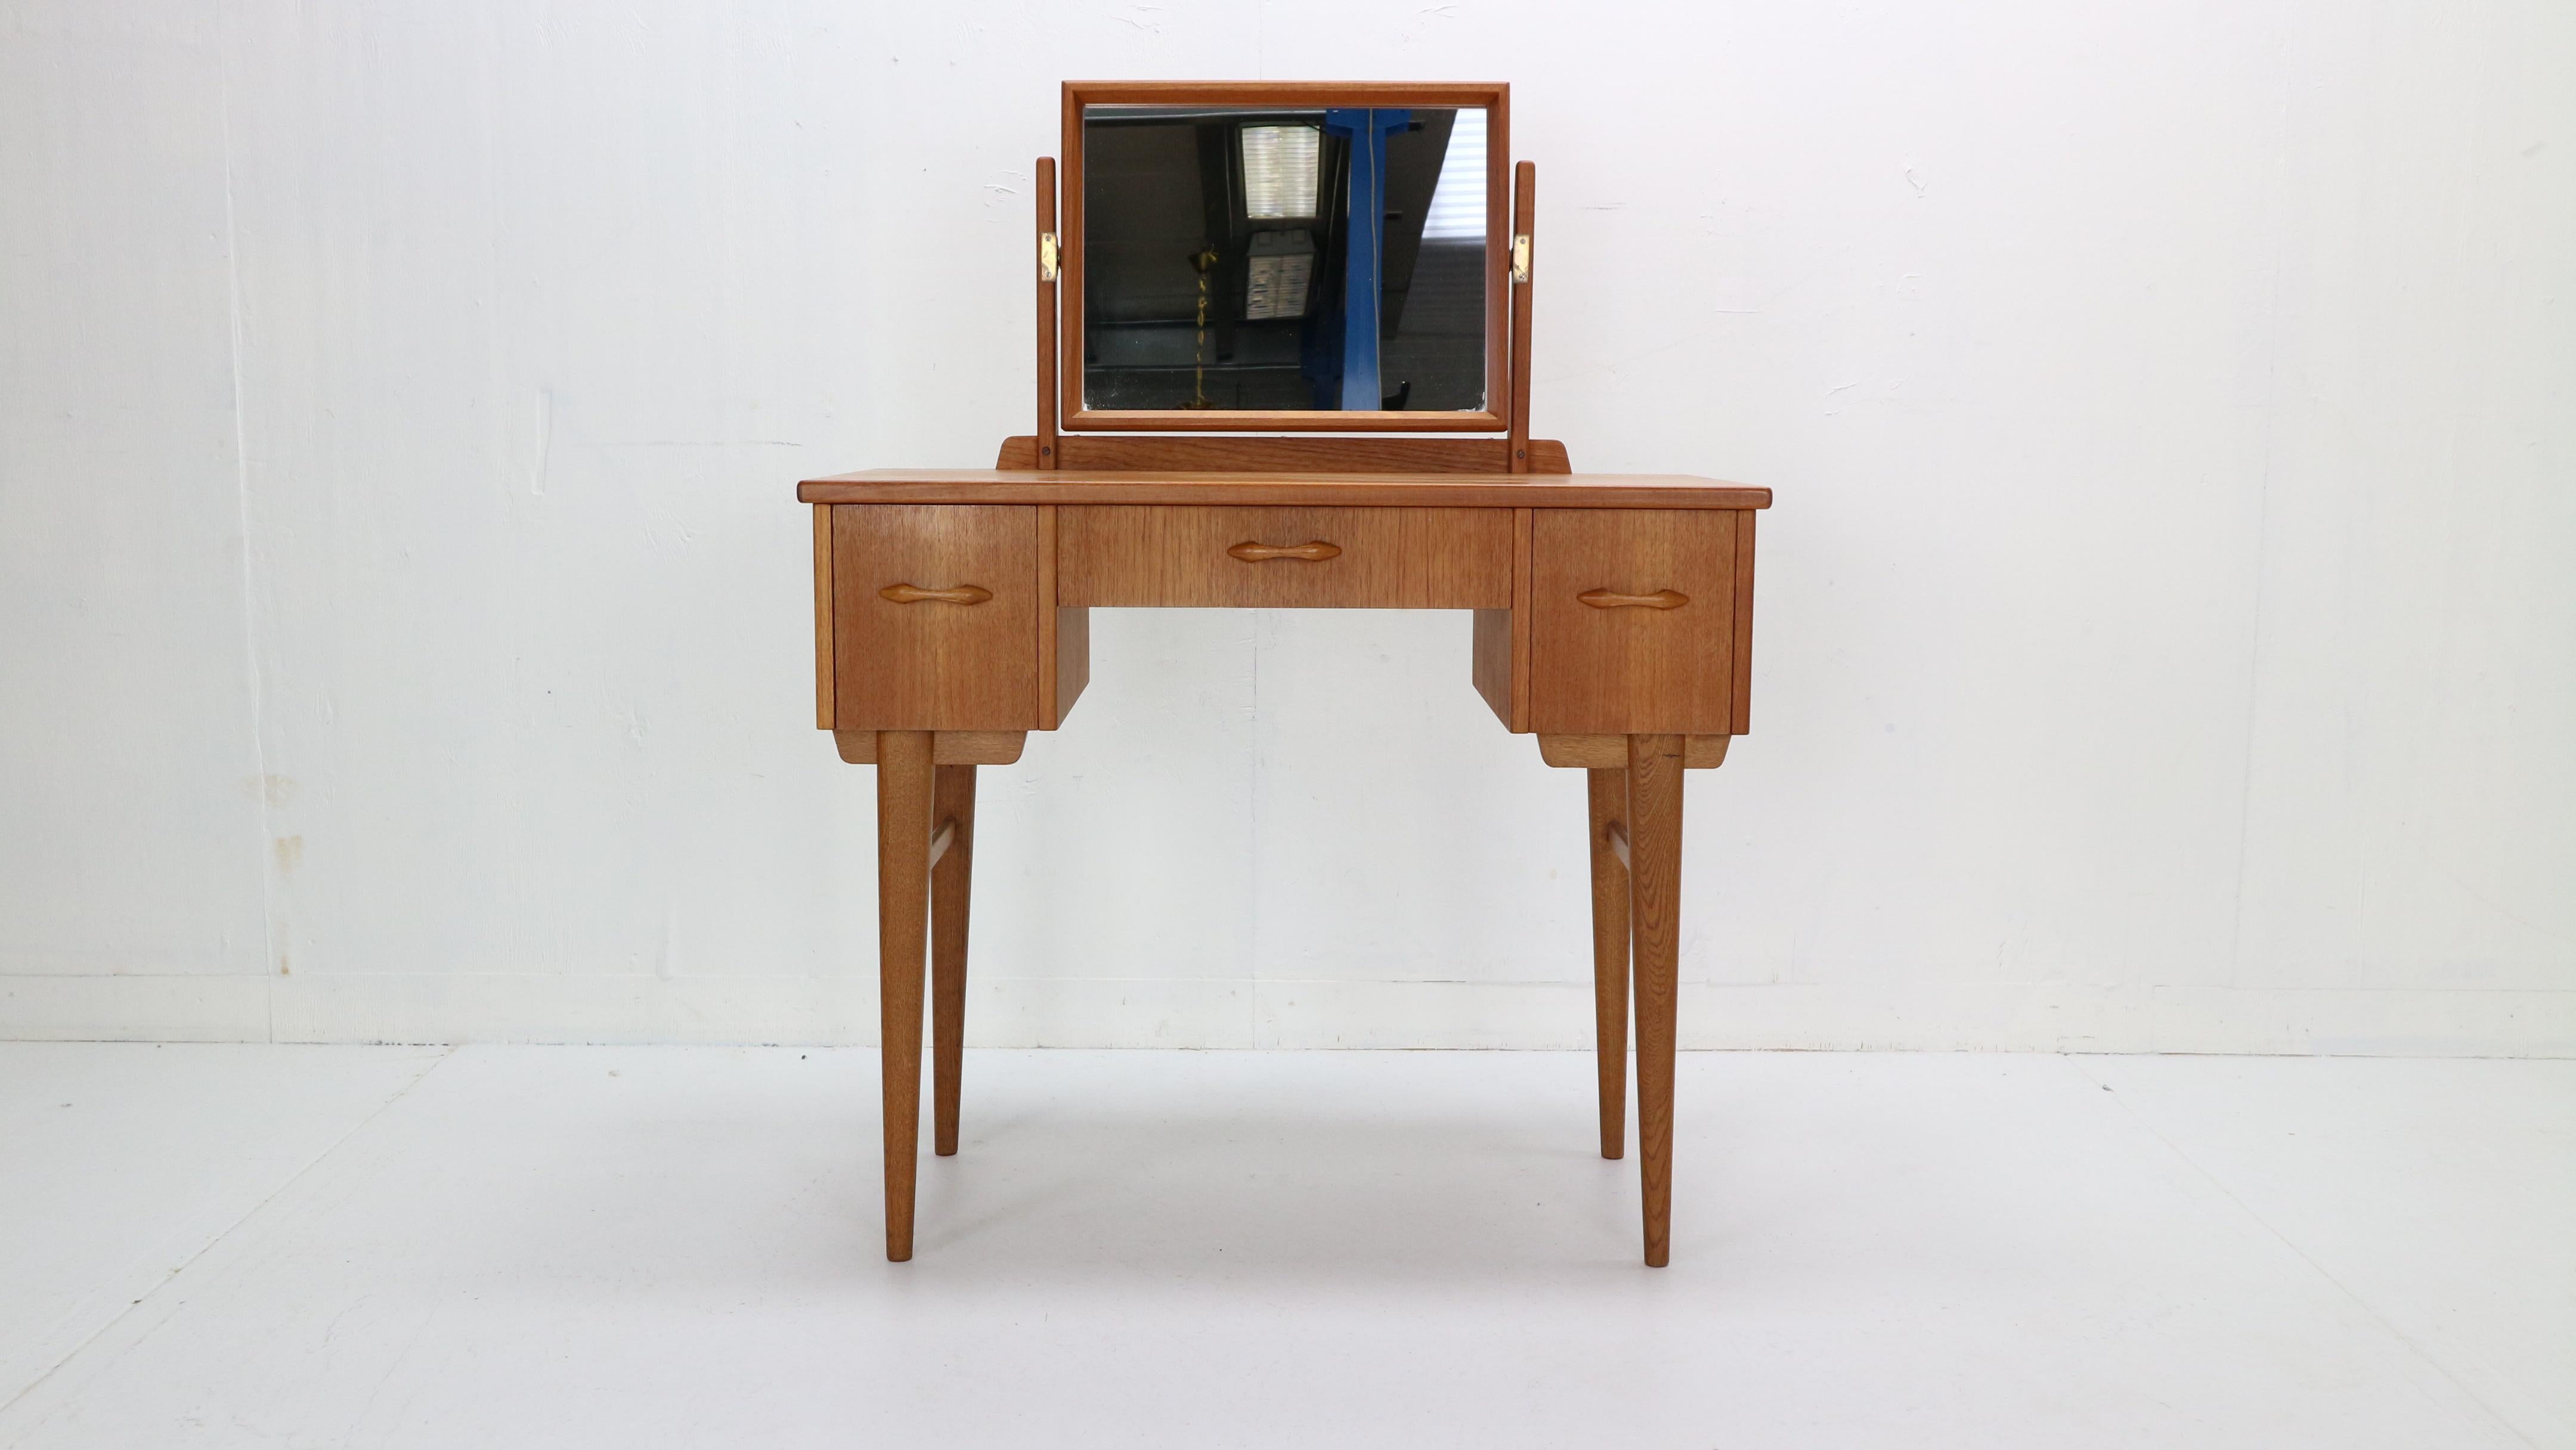 Scandinavian Modern period dressing- makeup manufactured by AB Bjärni Bjärnum, 1950s period, Sweden.
Elegant vanity table mixes simplicity and details in a superb way.
Made of teak wood and consists three drawers and mirror. Adjustable mirror is